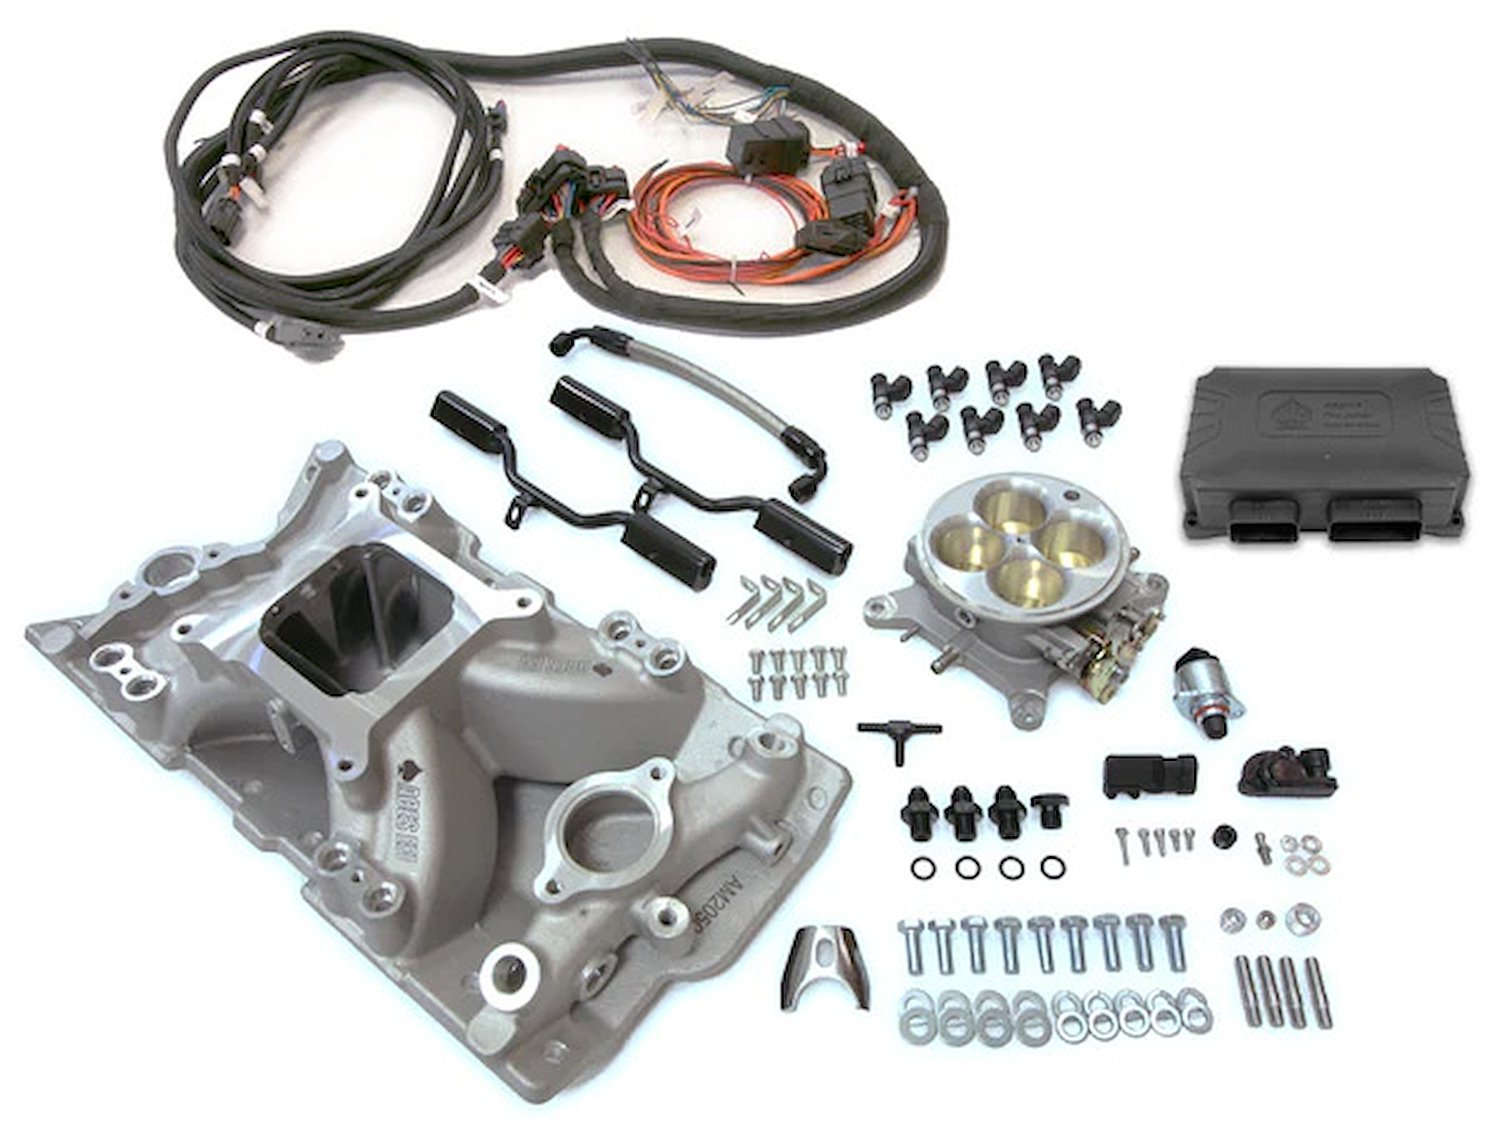 AS2015P-SBC-S2060 The Joker EFI Standalone Management System, Small Block Chevy, with Silver AM2060 Intake Manifold